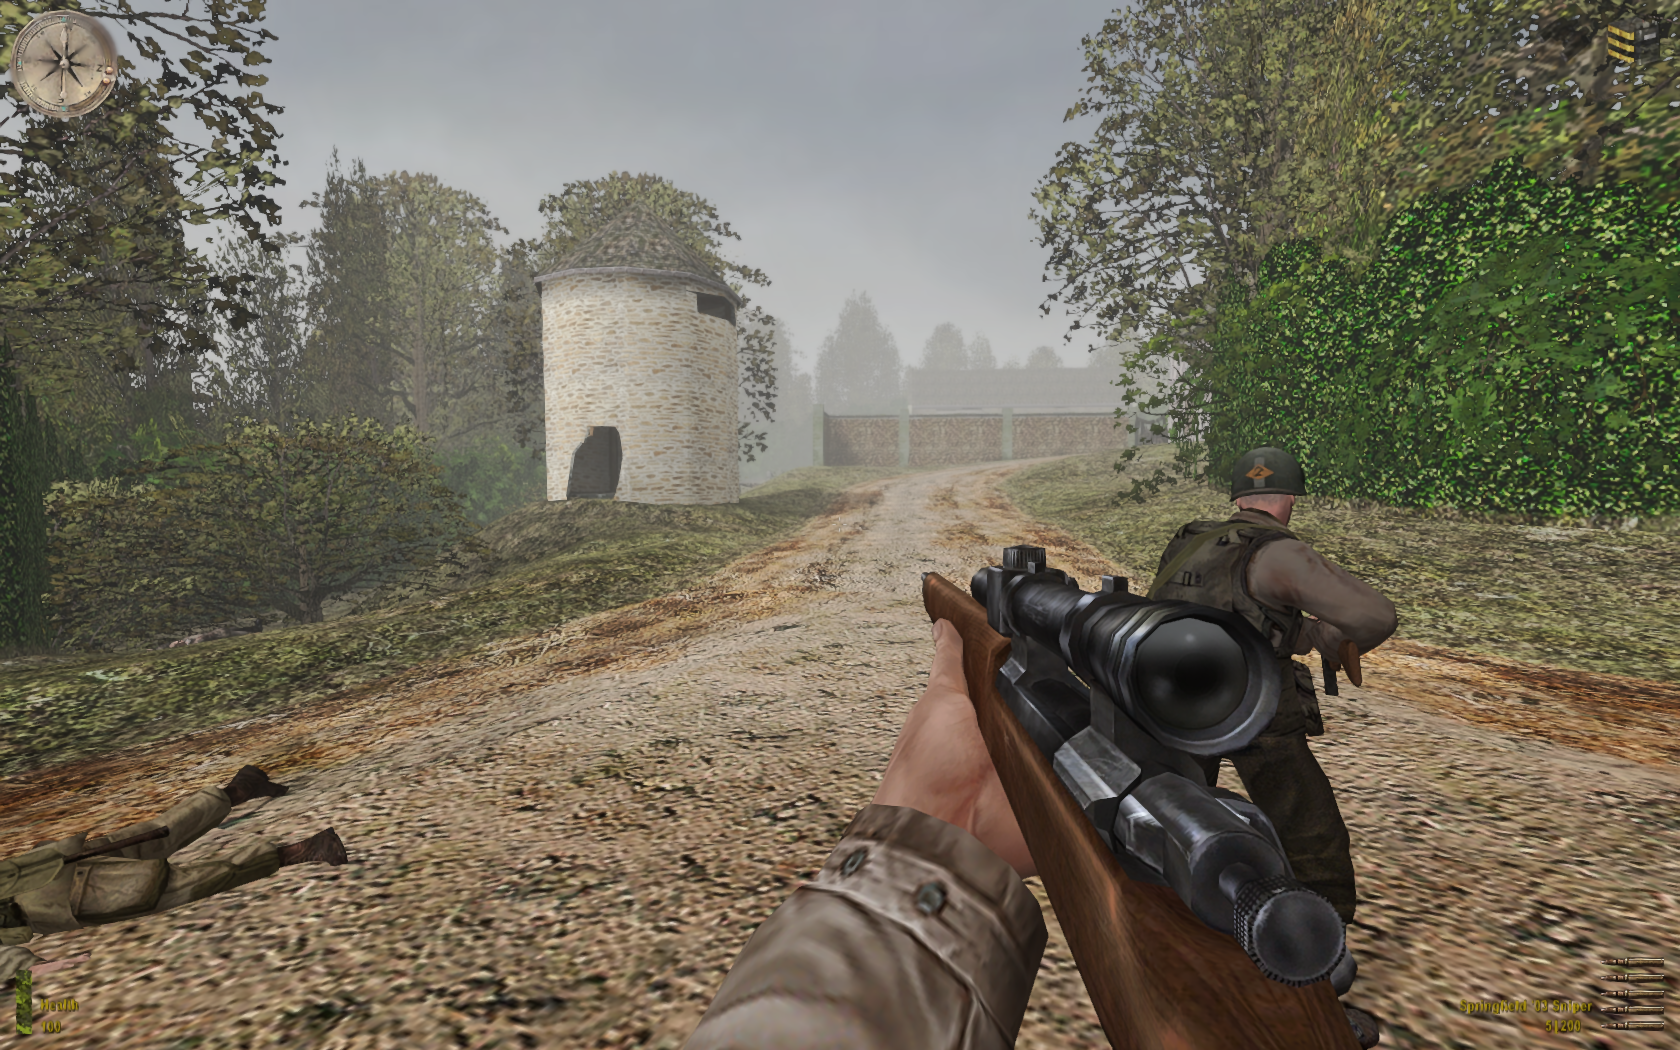 medal of honor game ww2